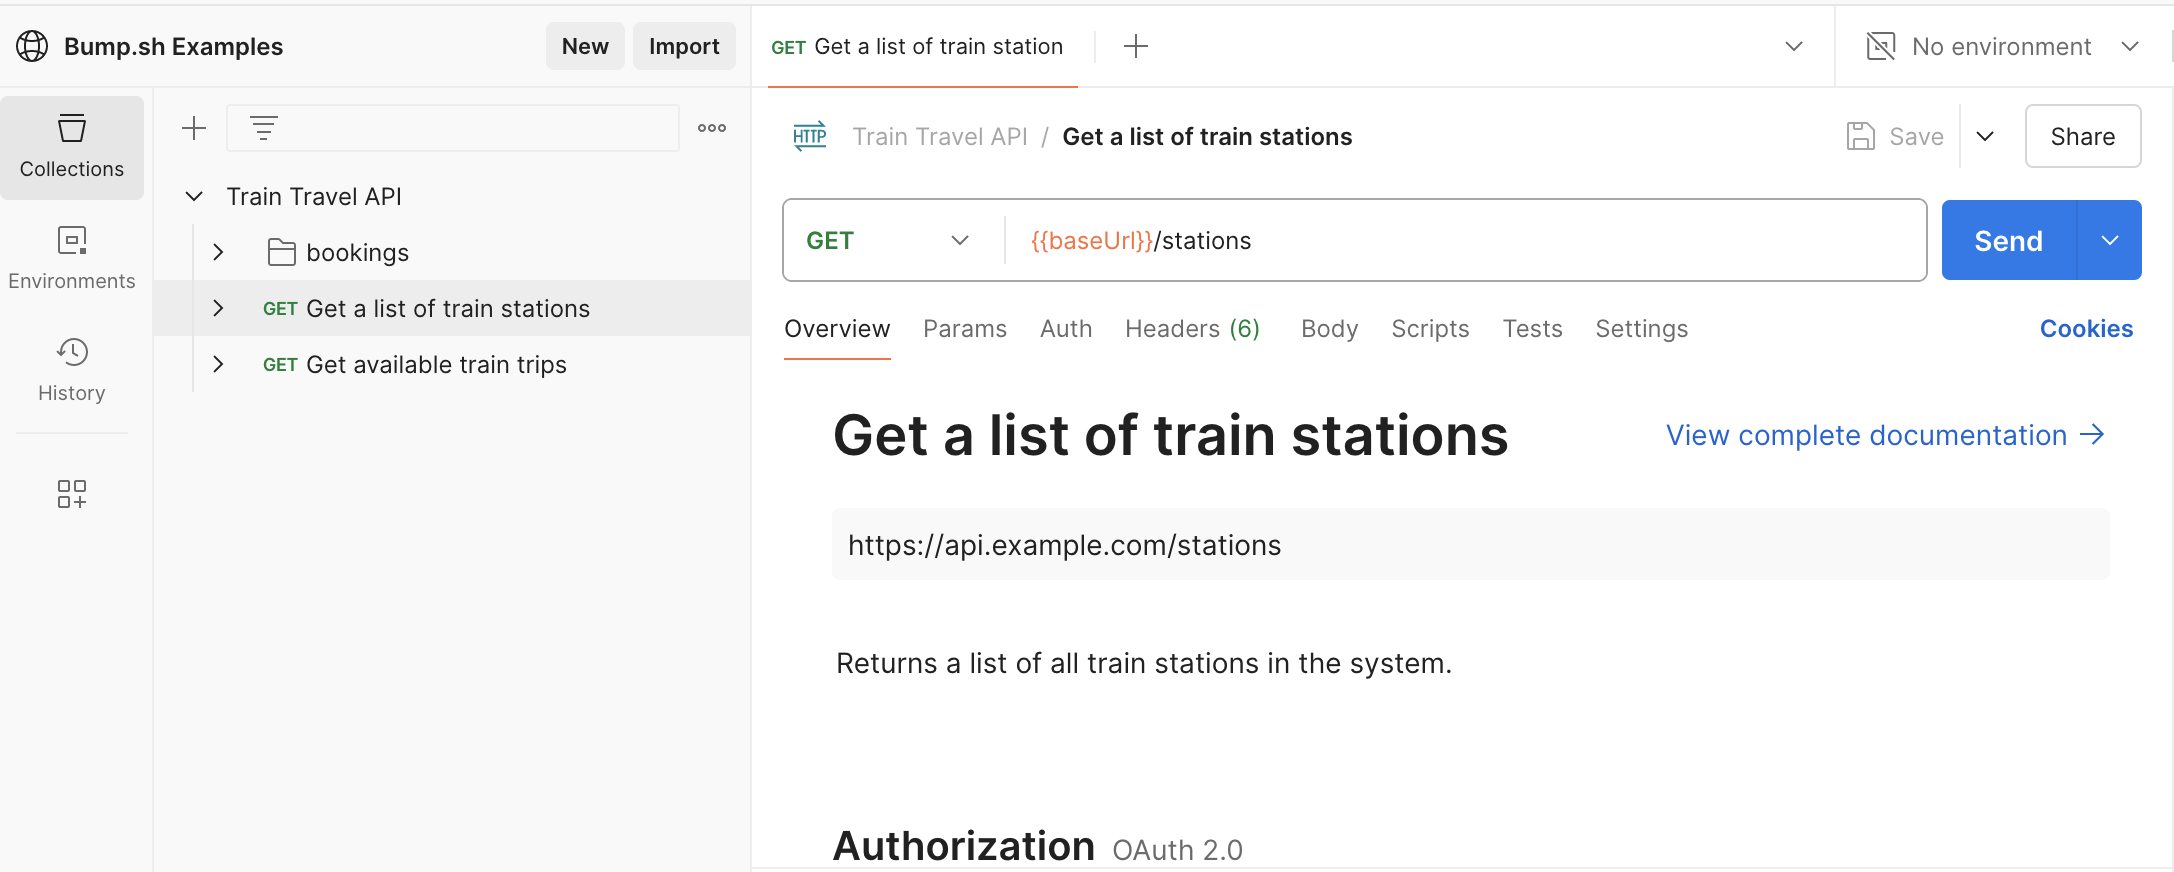 The view Postman users will get after clicking that button, with the Train Travel API example, and operation Get a list of train stations selected ready for HTTP requests